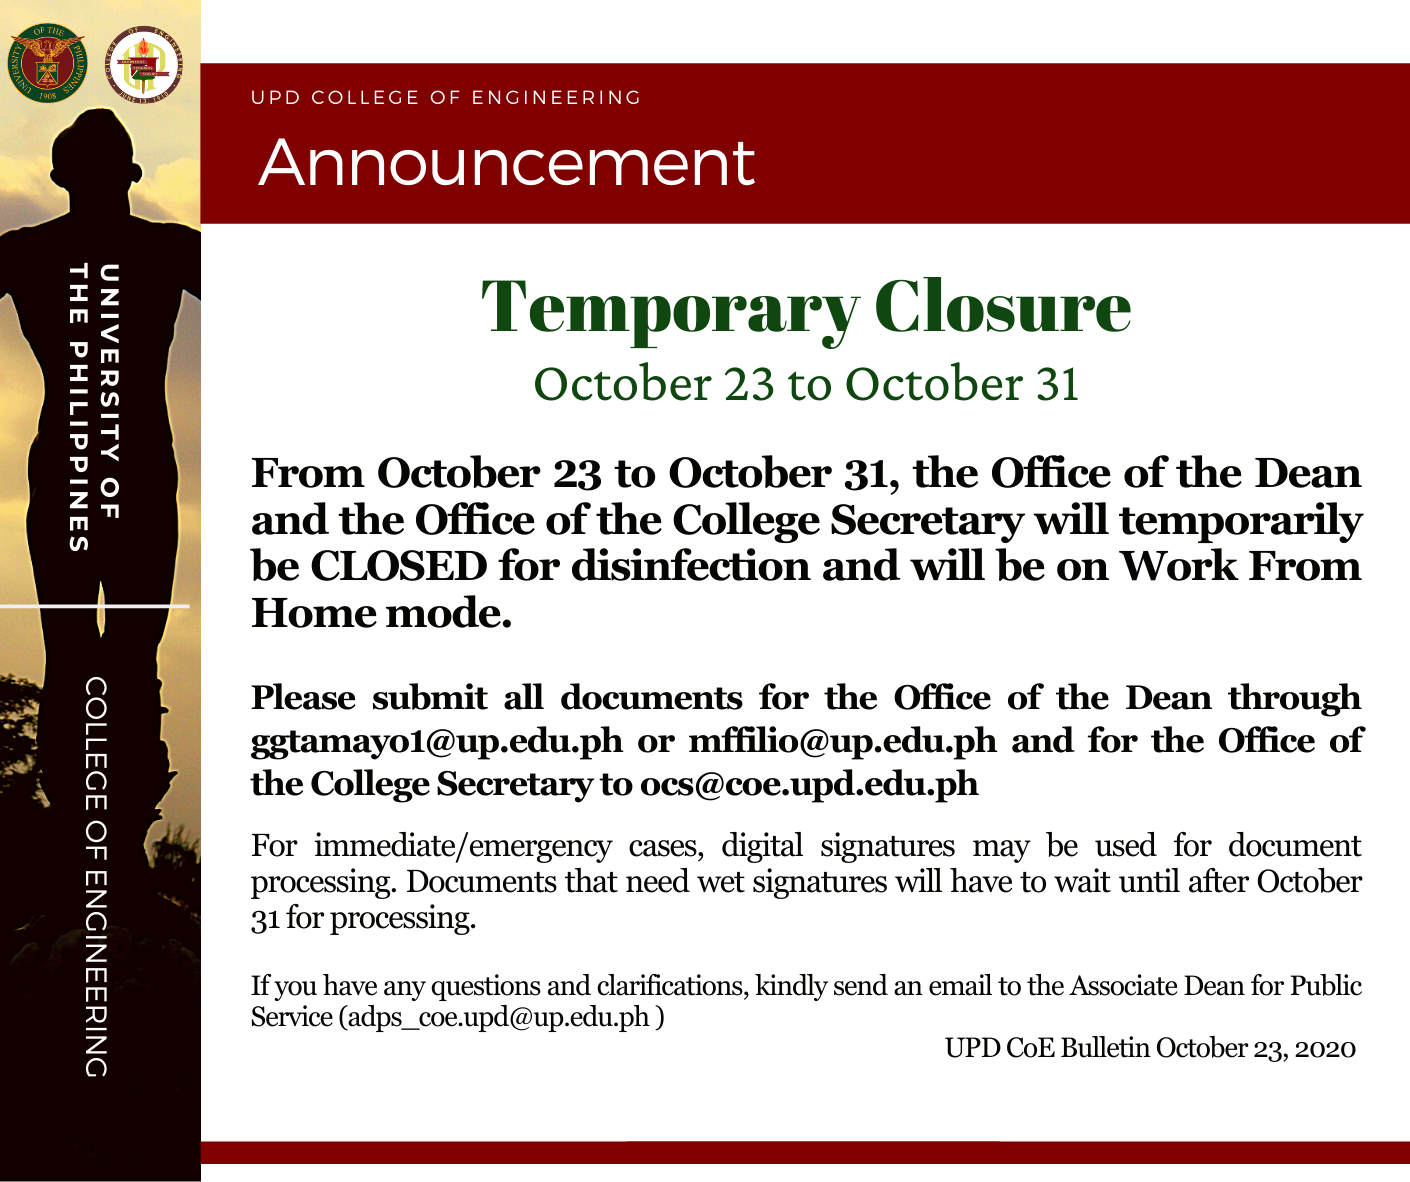 Temporary Closure of the Dean’s Office and the Office of the College Secretary from Oct. 23 to 31